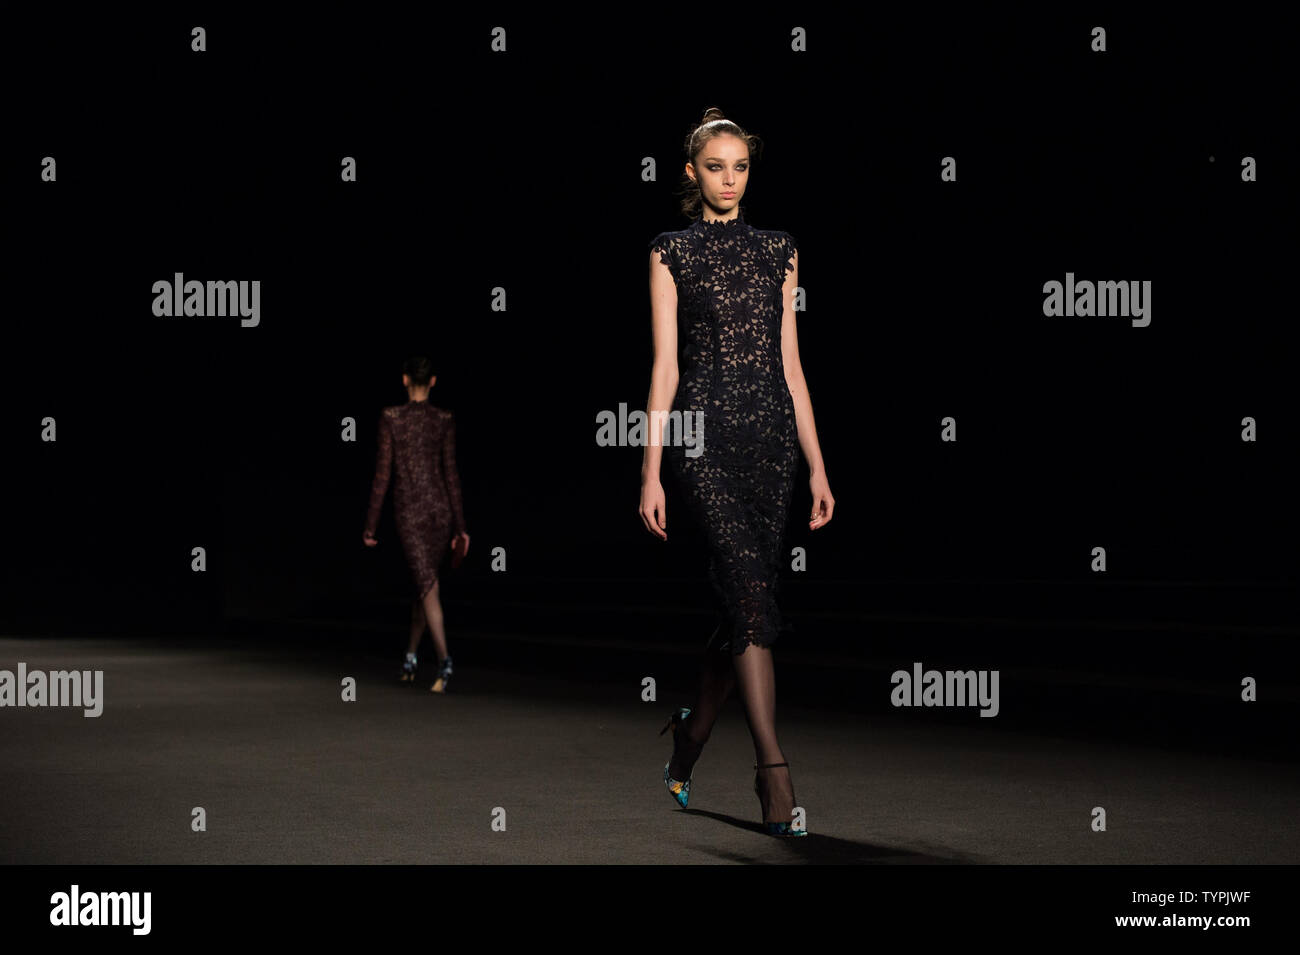 A model walks on the runway at the Monique Lhuillier fashion show during Mercedes-Benz Fashion Week at Lincoln Center in New York City on February 13, 2015. February's New York Fashion Week will be the last one held at Lincoln Center.       Photo by Andrea Hanks/UPI Stock Photo